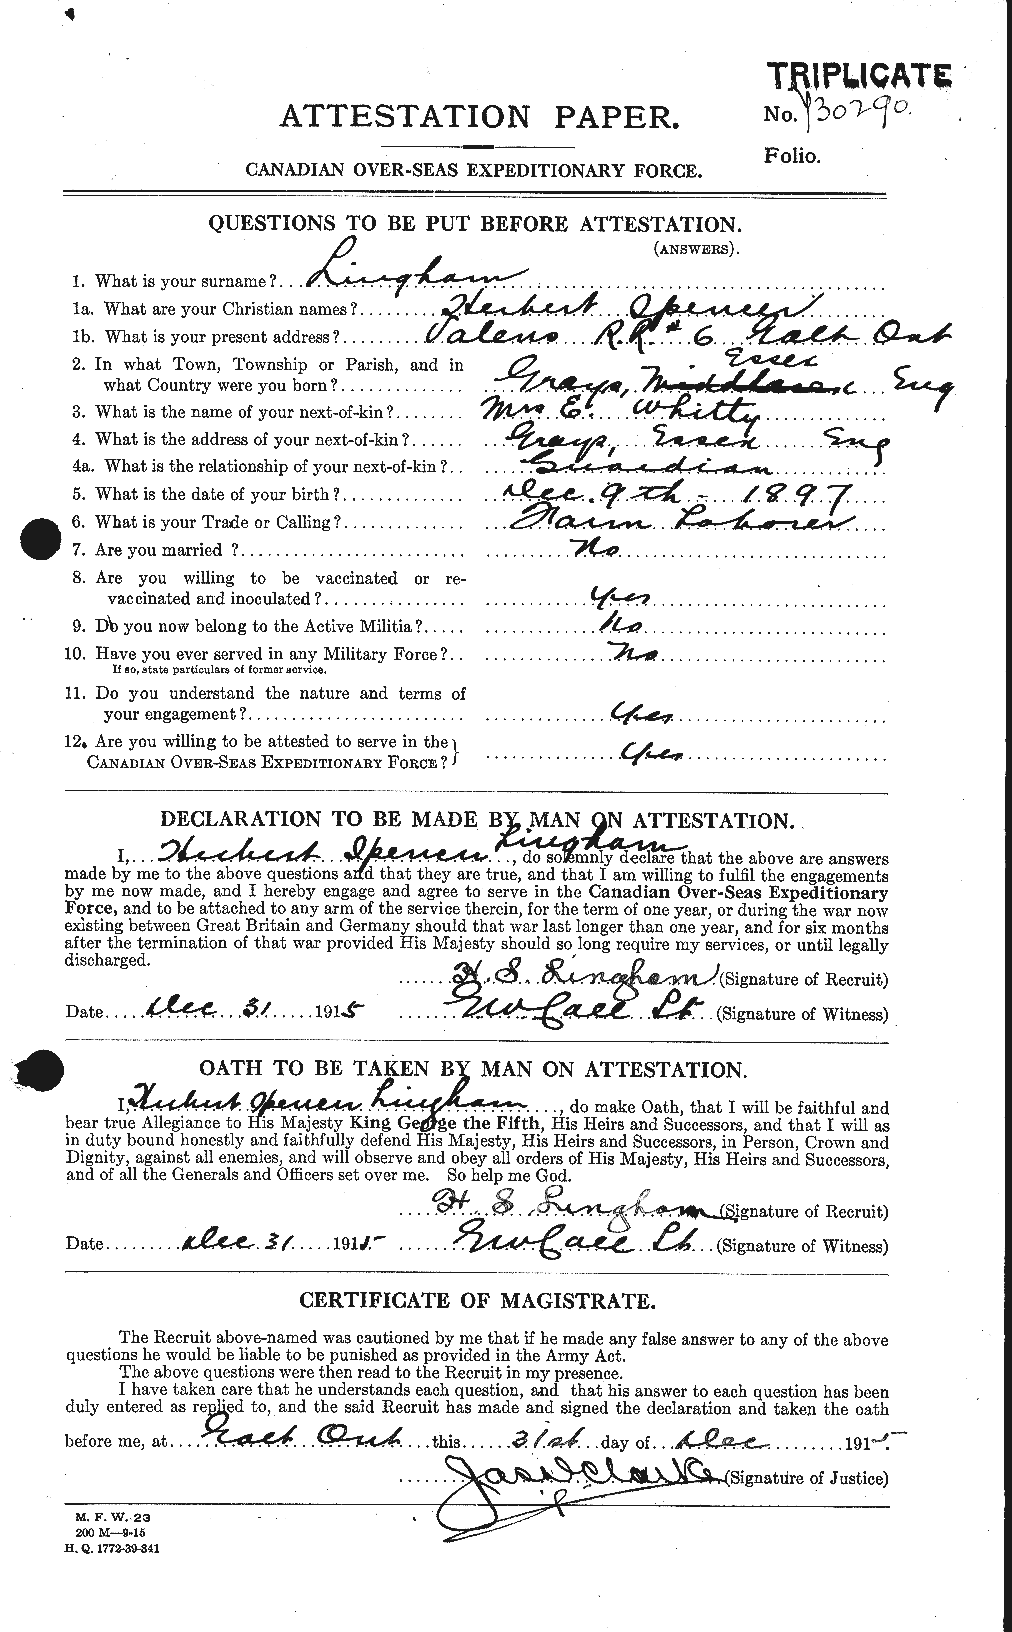 Personnel Records of the First World War - CEF 467974a